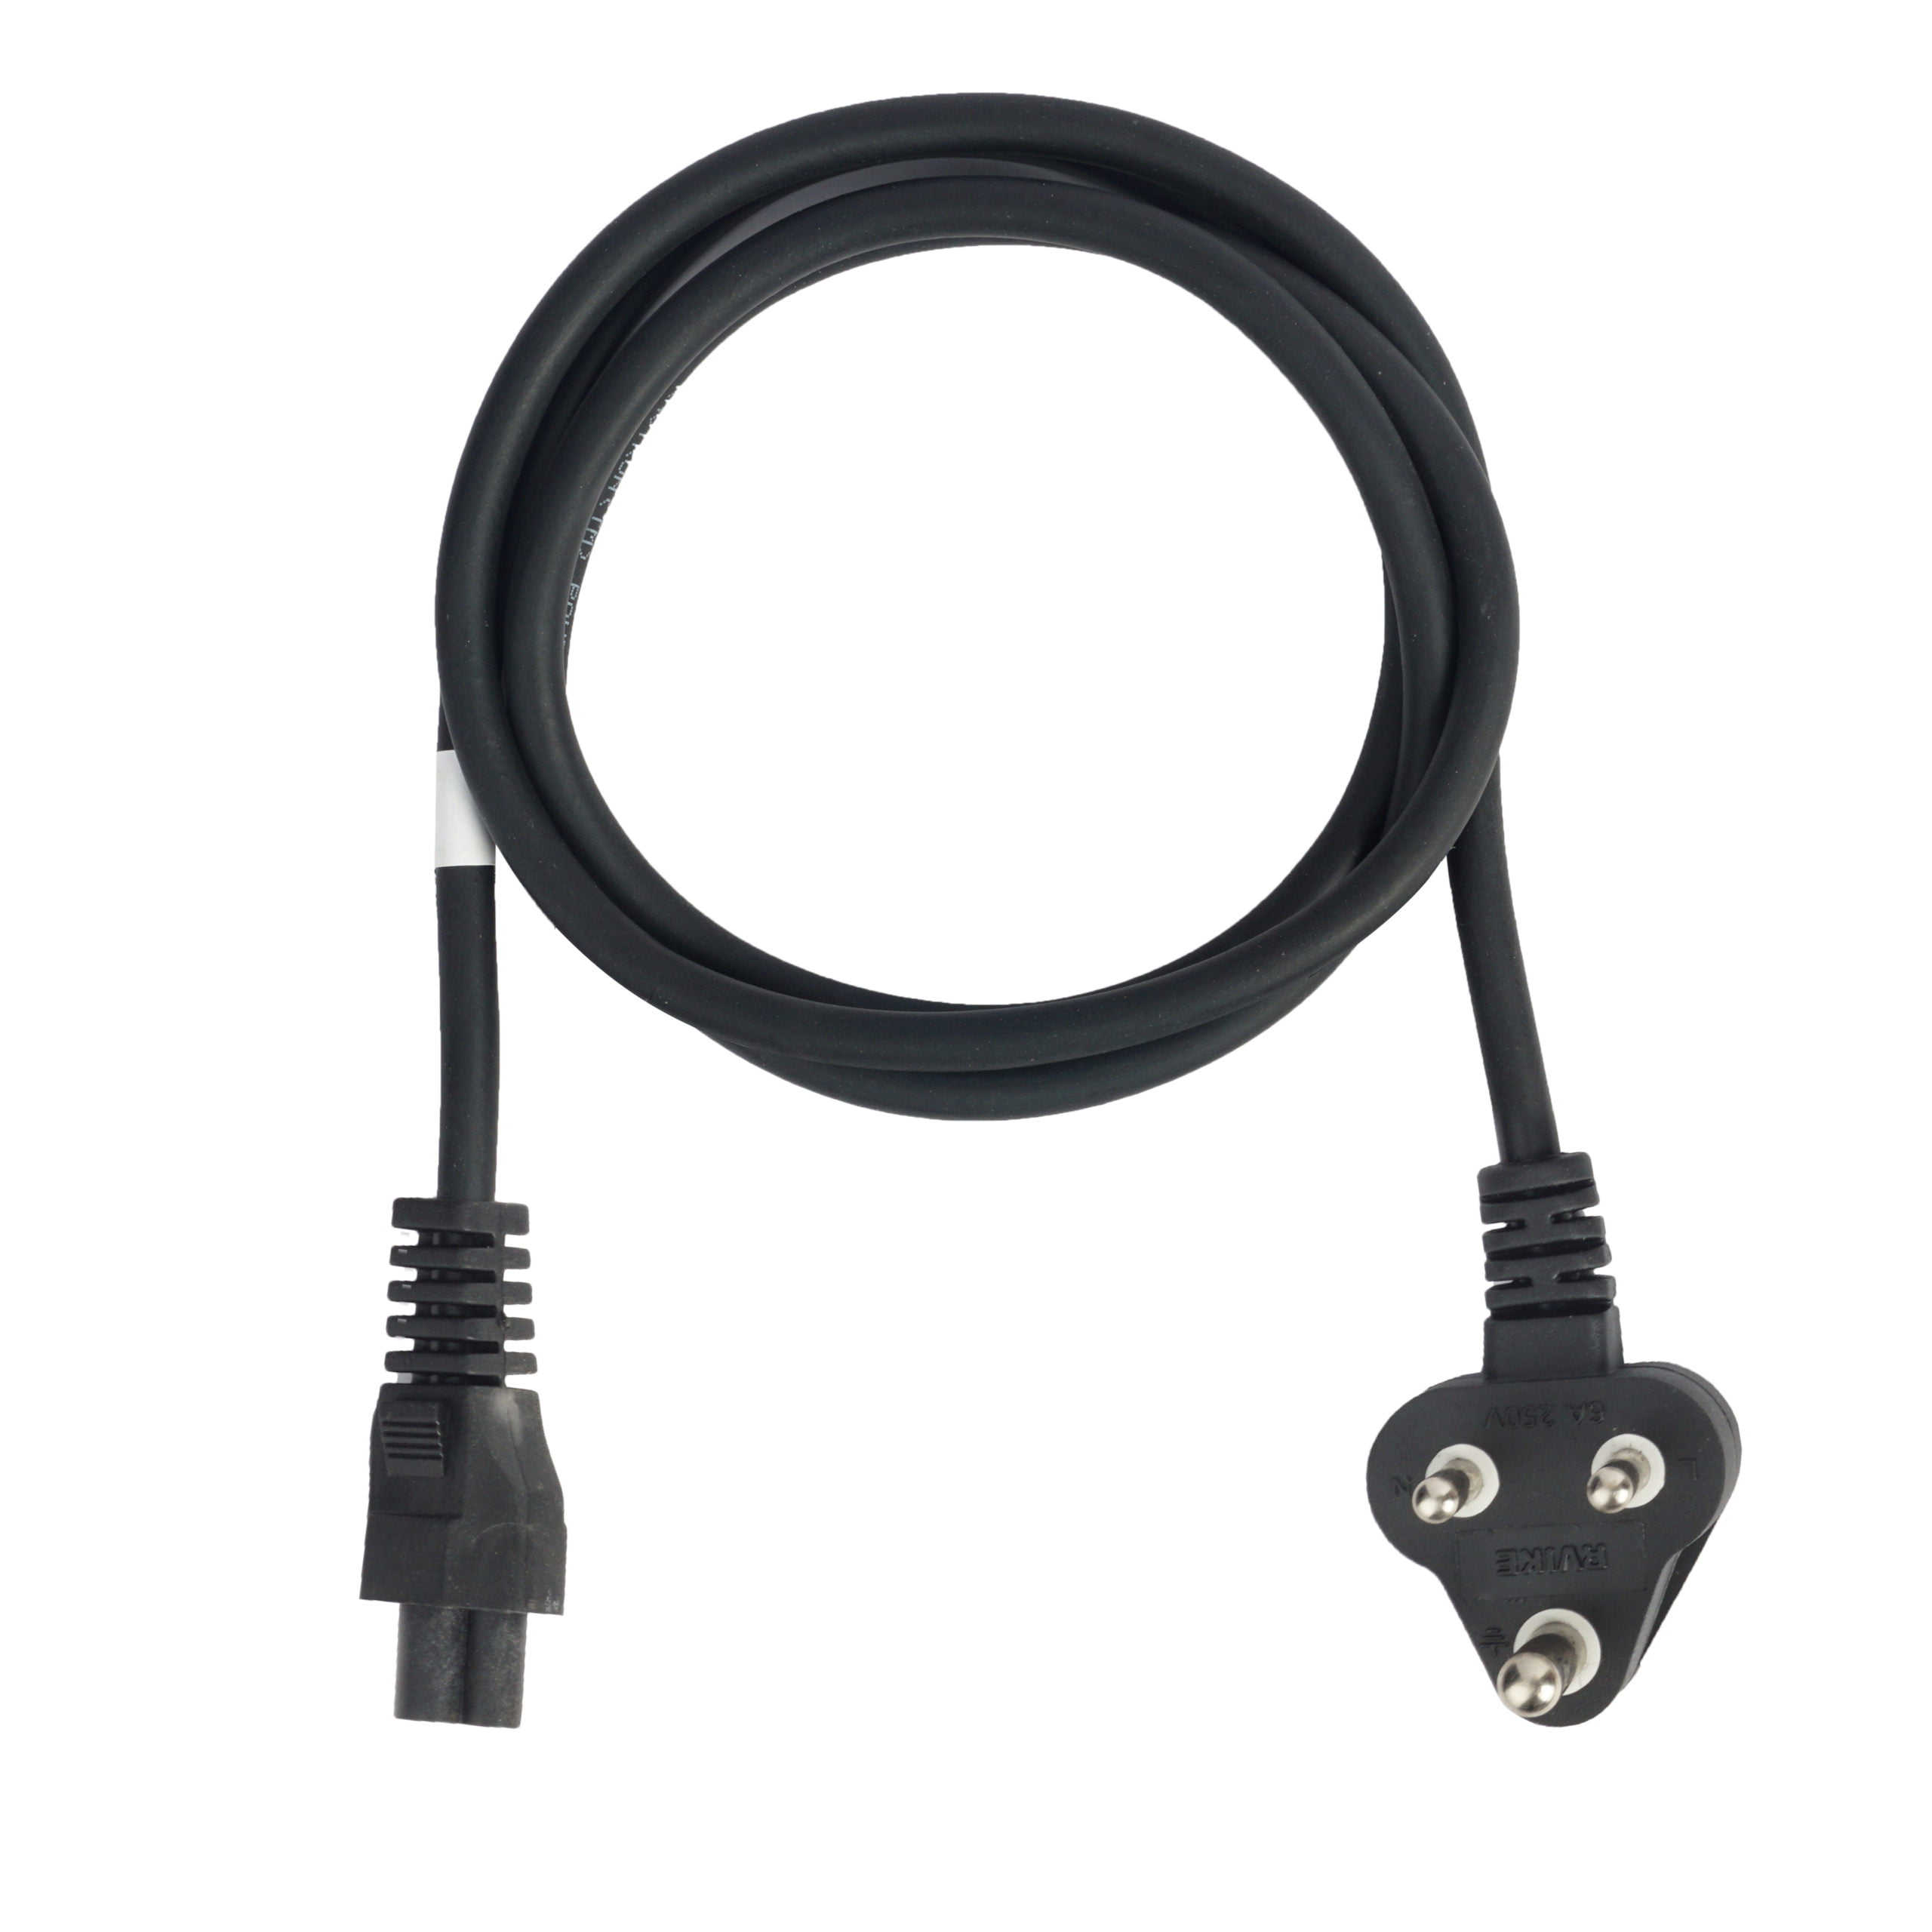 KSG Automation - Rvike Laptop Power Cable scaled 1